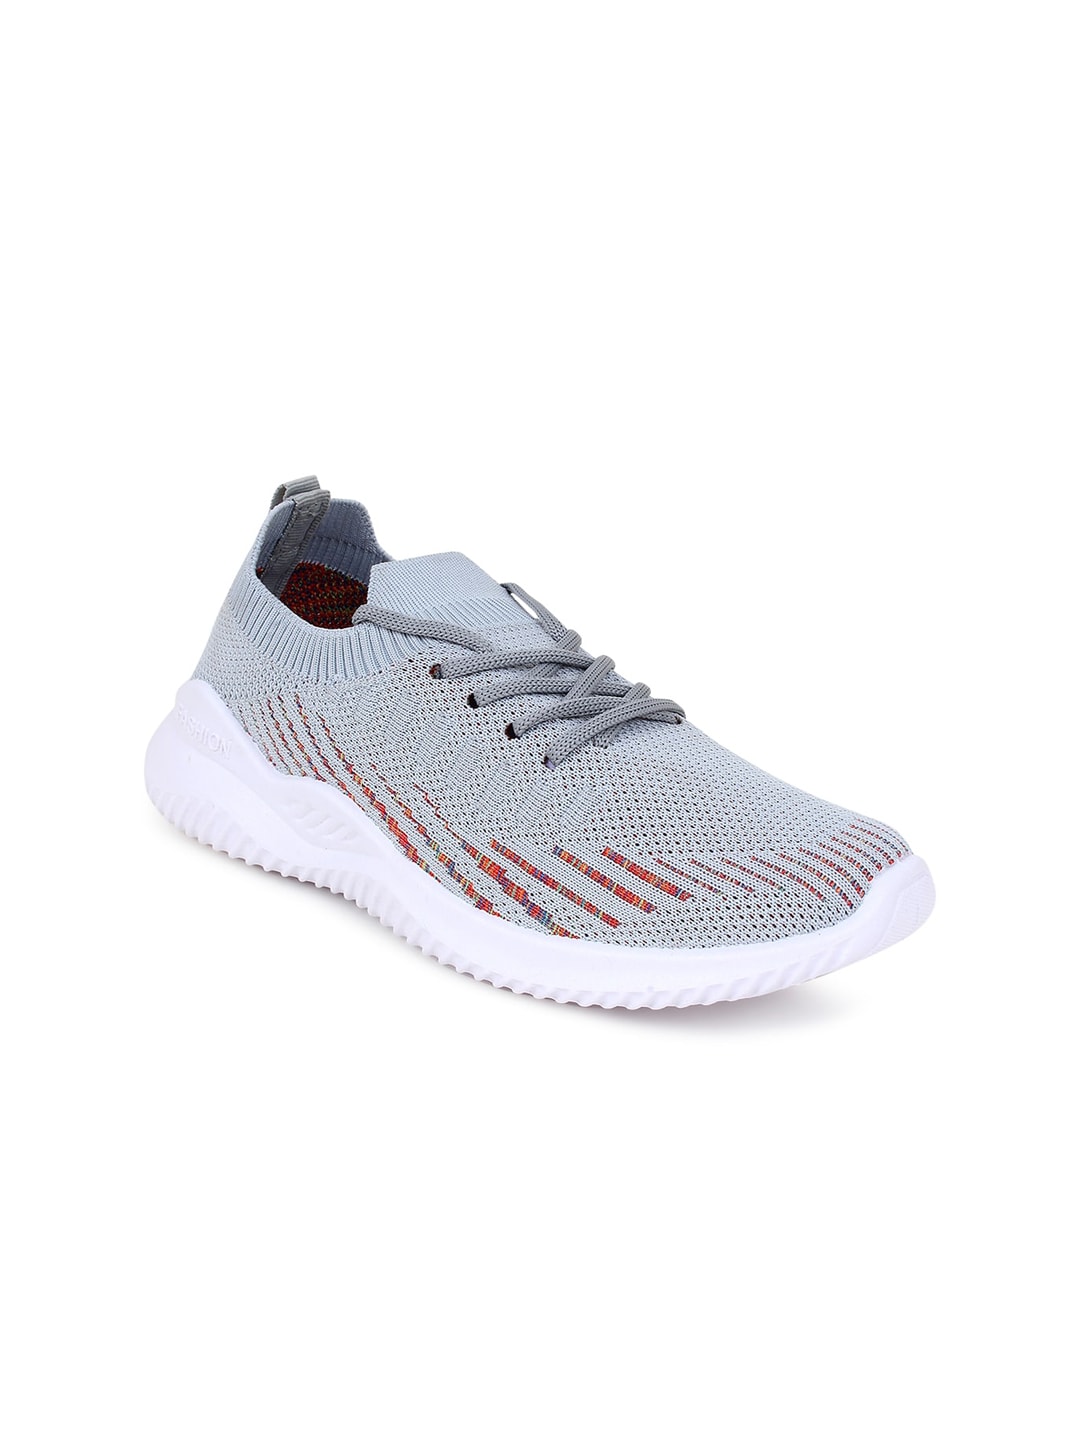 Champs Women Grey Woven Design Sneakers Price in India